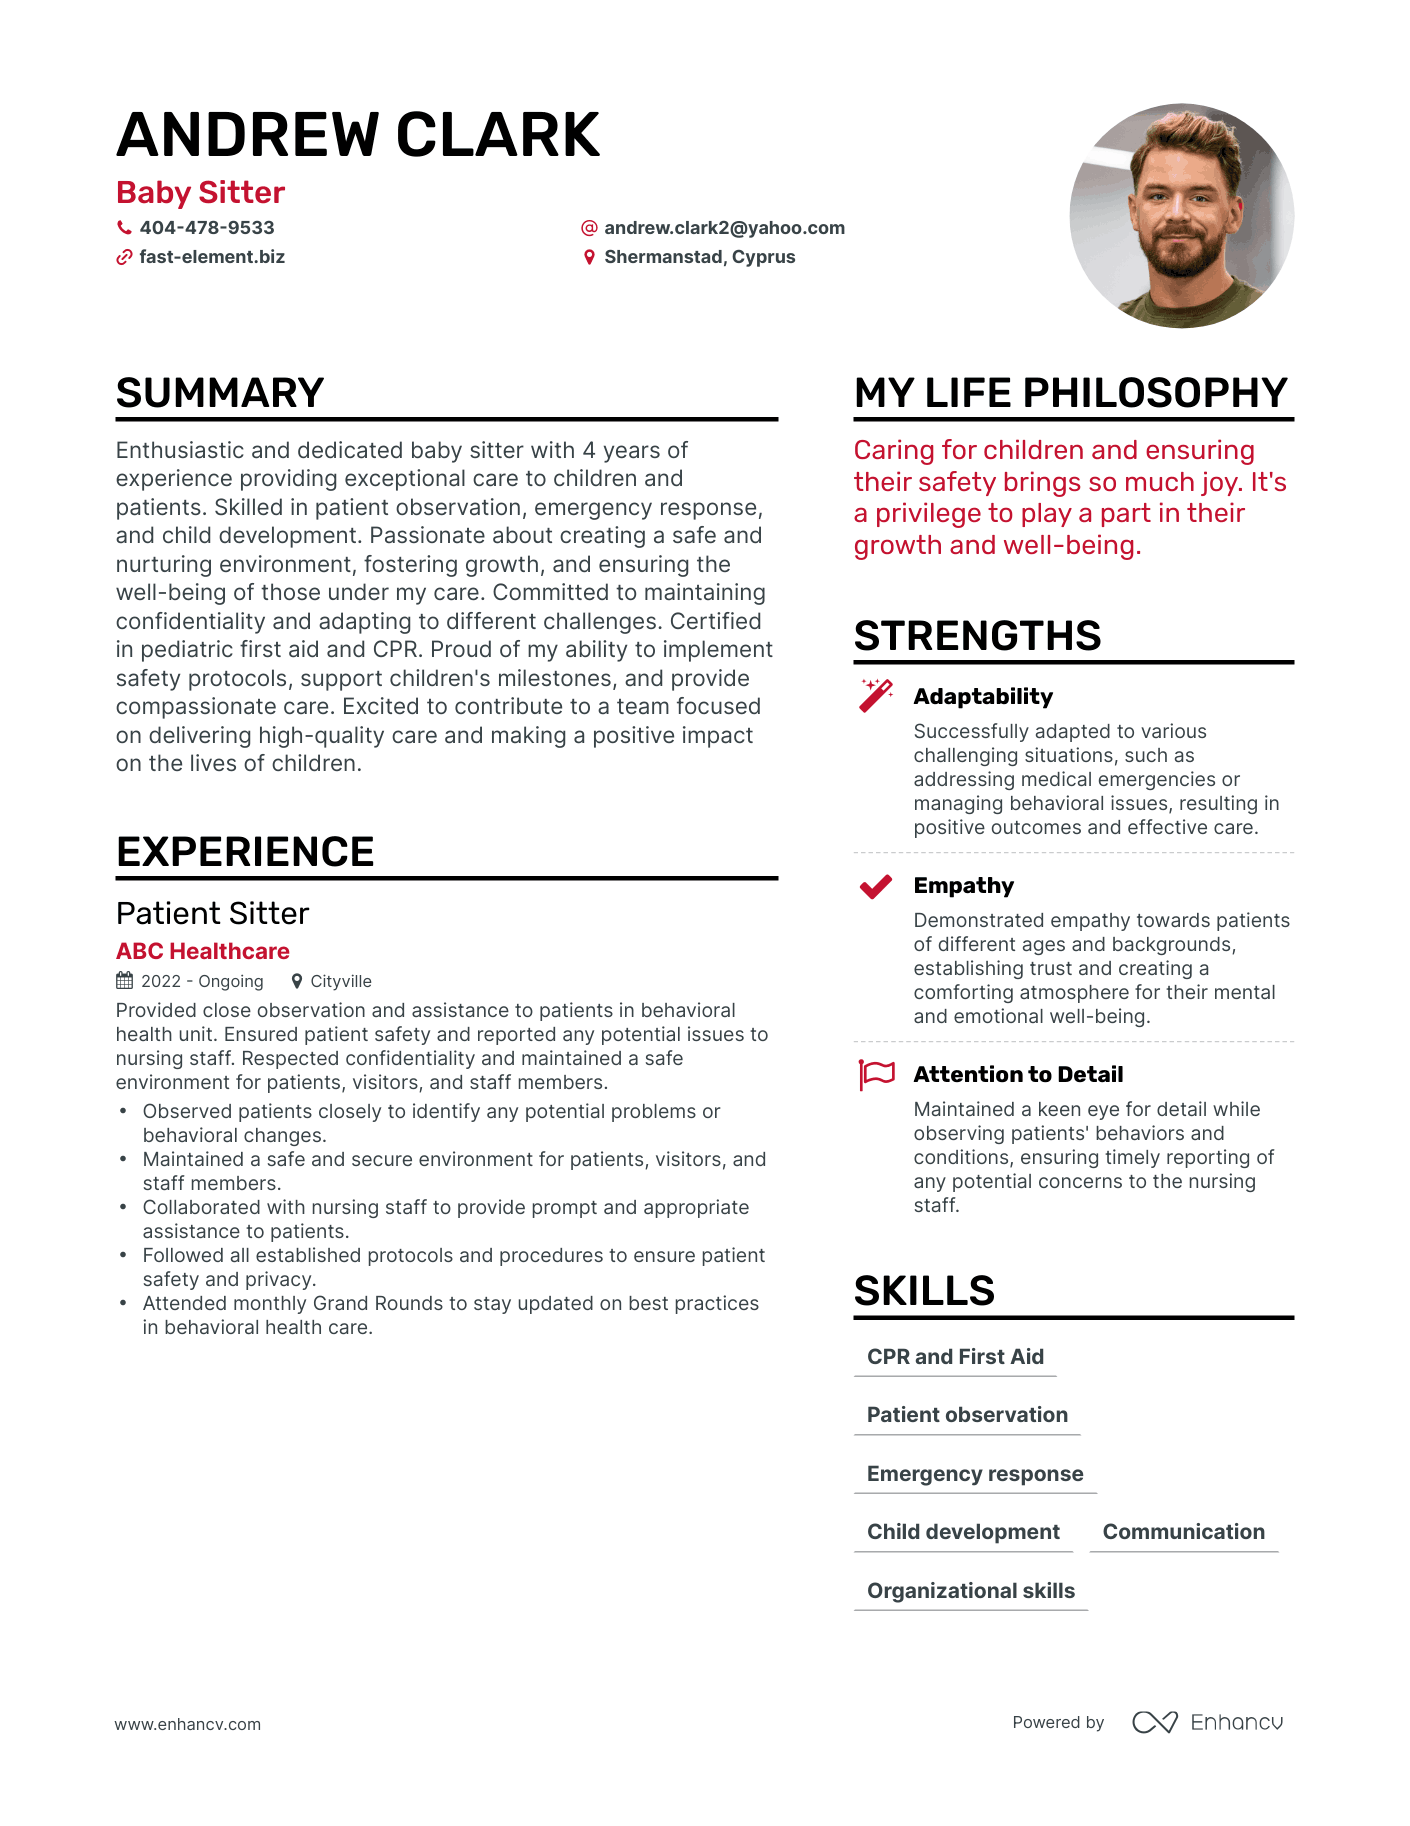 Baby Sitter resume example